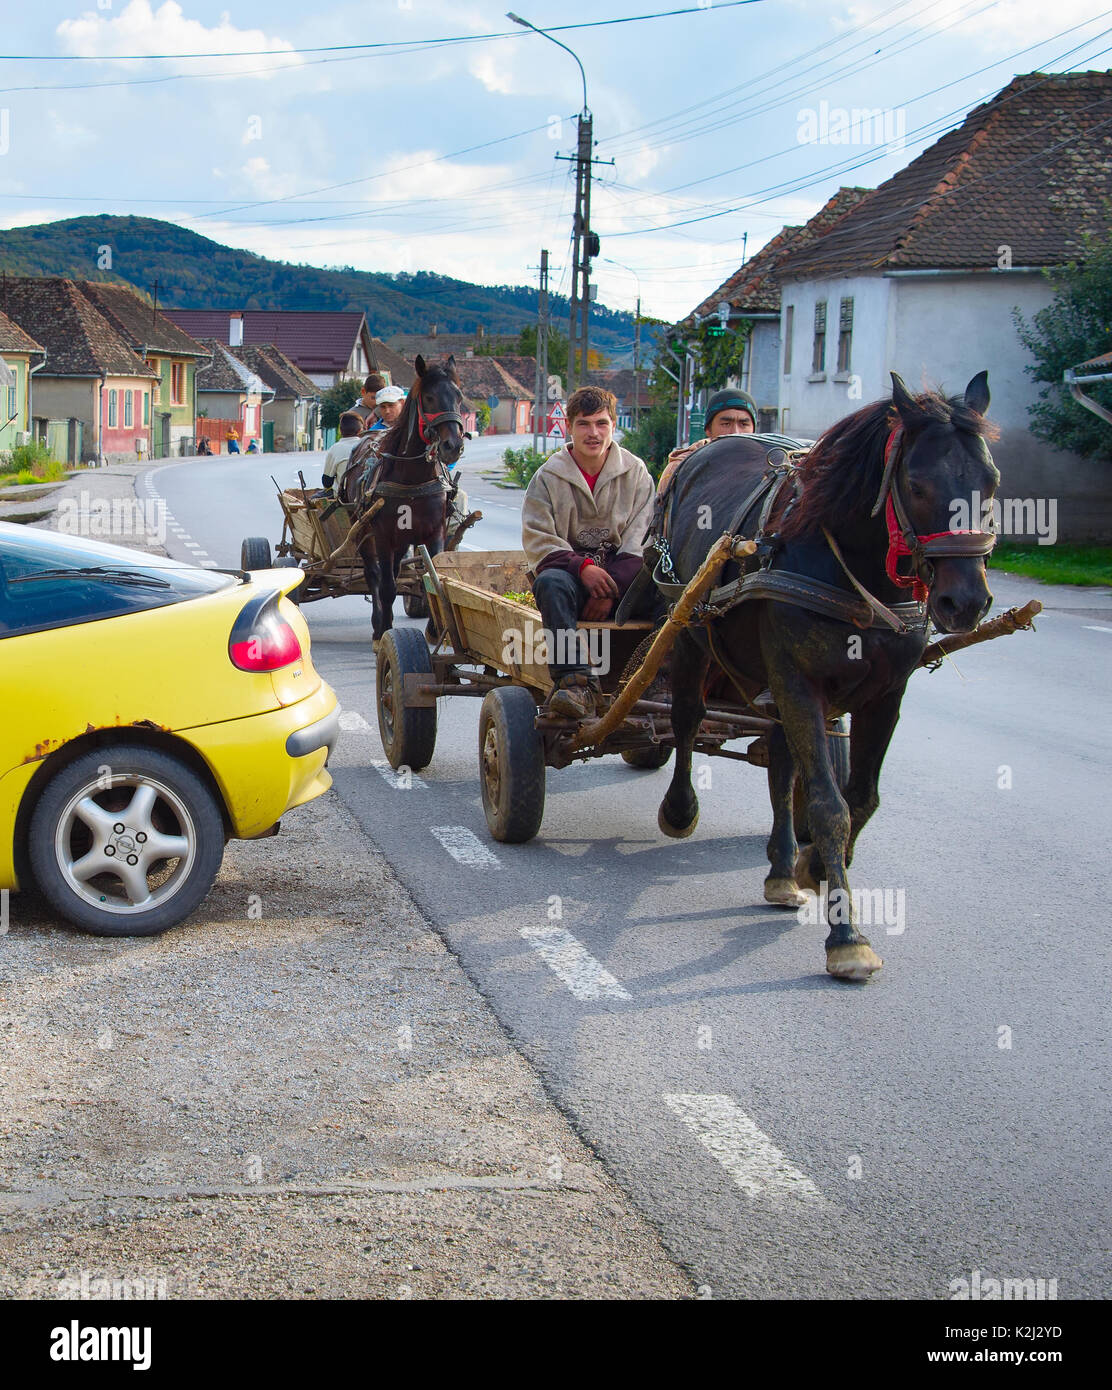 DANES, ROMANIA - OCTOBER 05, 2016: Locals driving horse cart on a road in a small Romanian village. The Romanian government claims that 10% of road ac Stock Photo